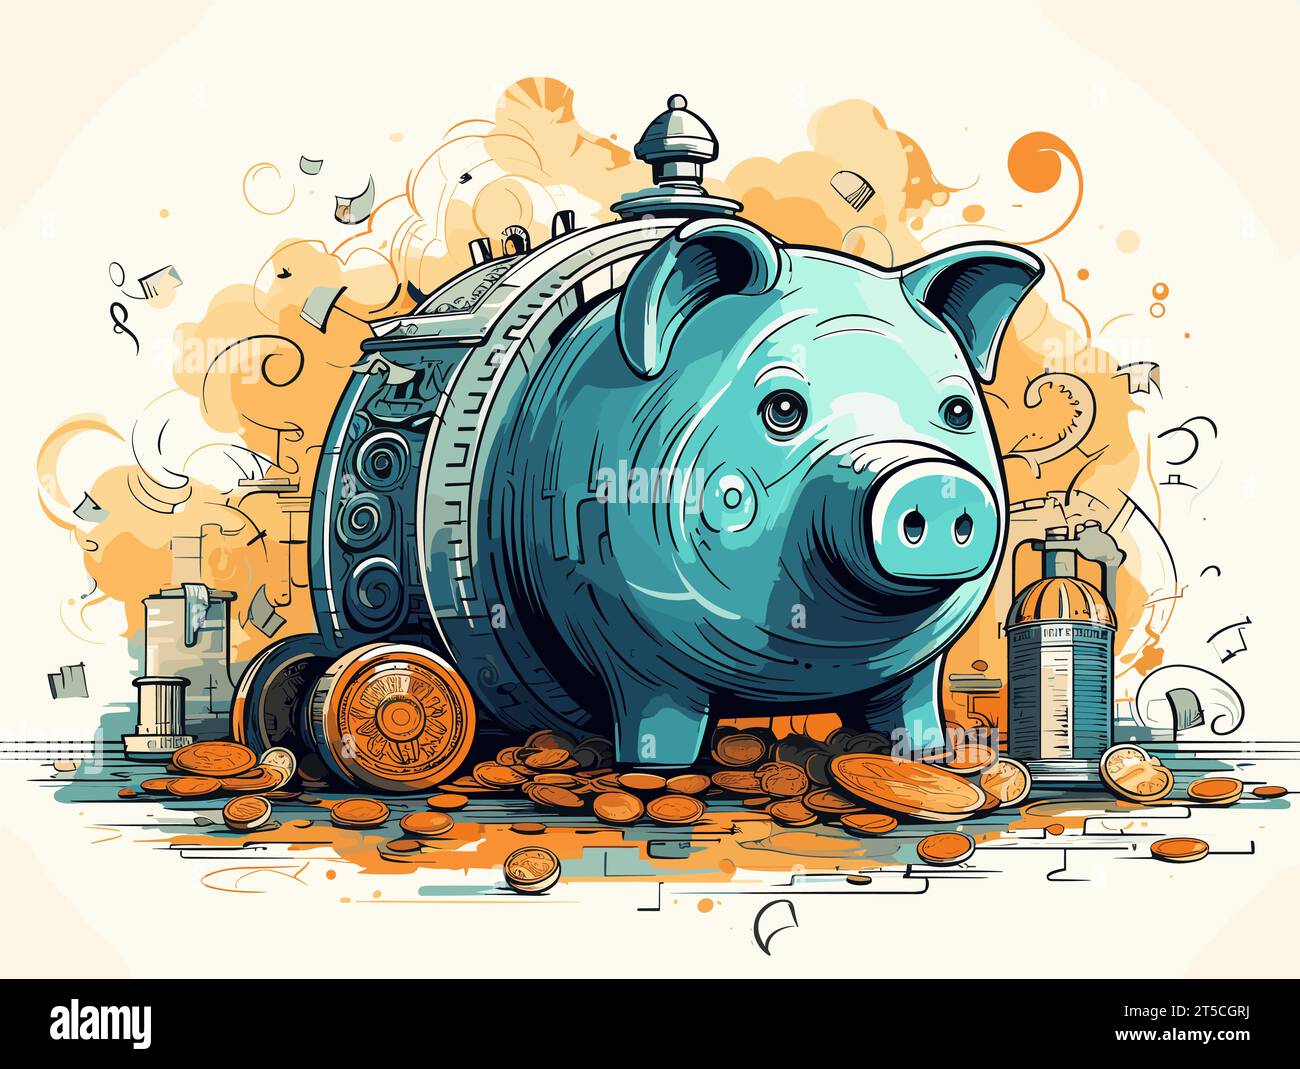 Drawing of Piggy bank saver illustration separated, sweeping overdrawn lines. Stock Vector